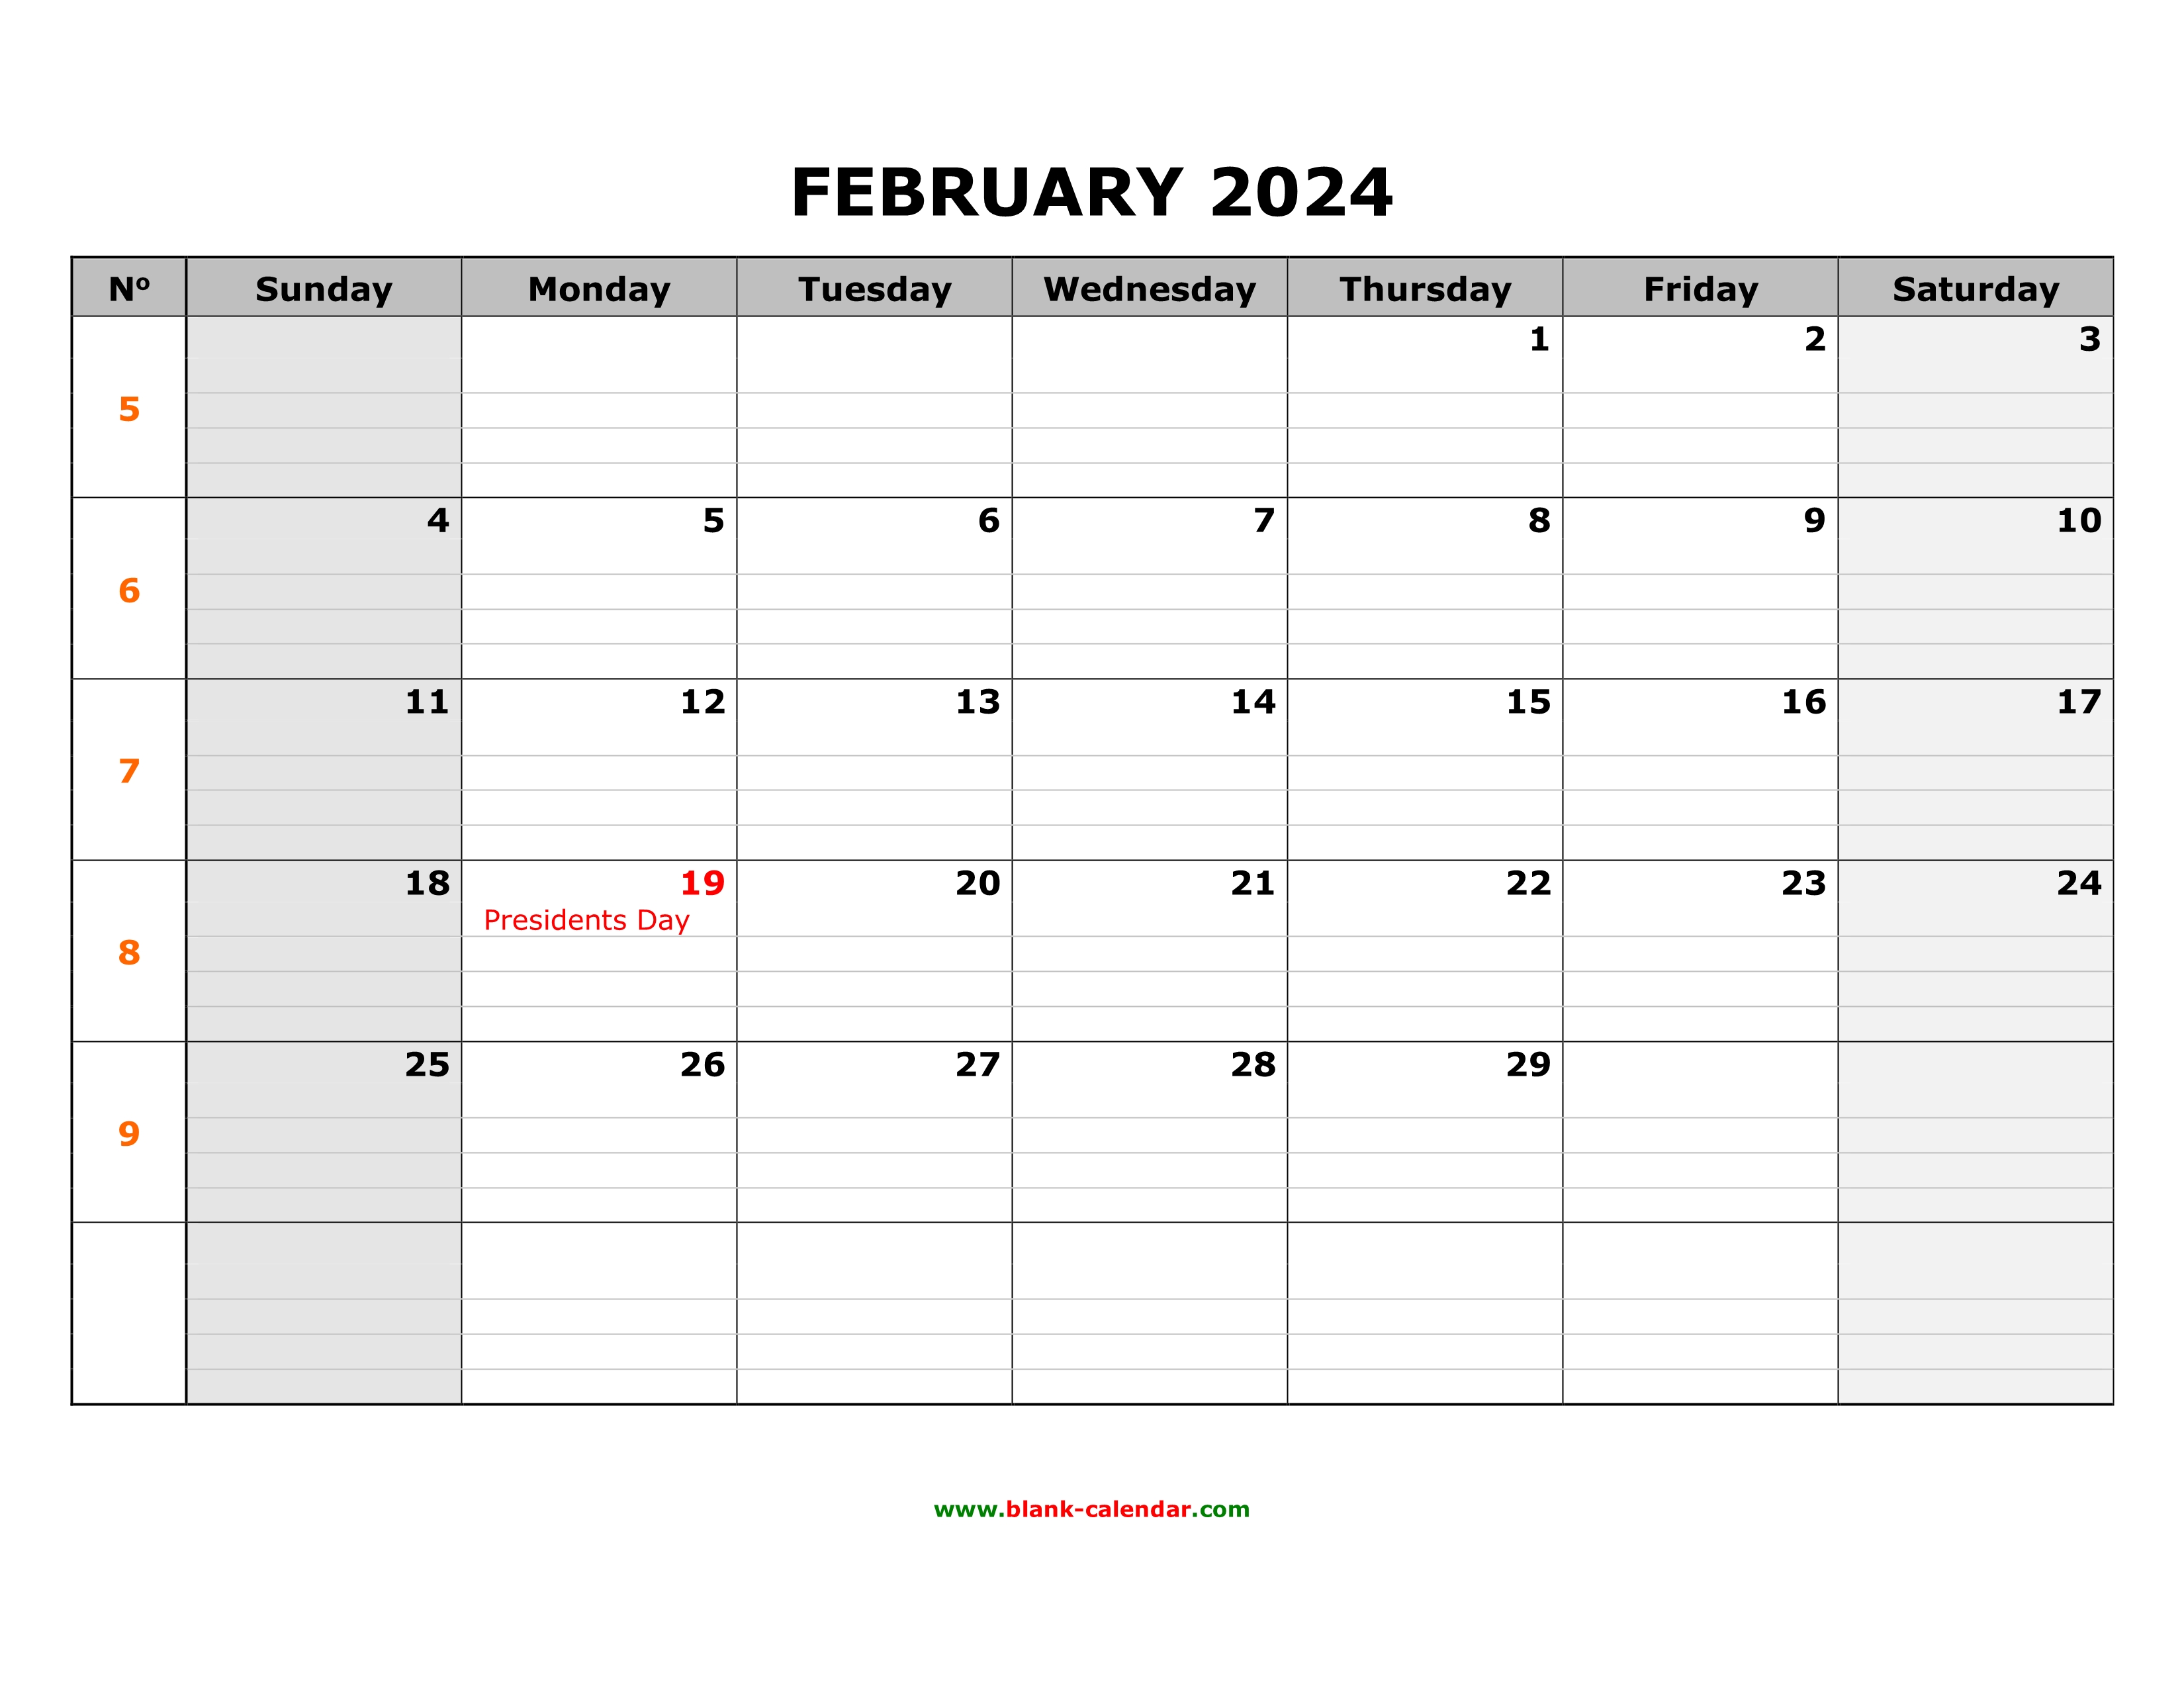 Free Download Printable February 2024 Calendar, large box grid, space for notes